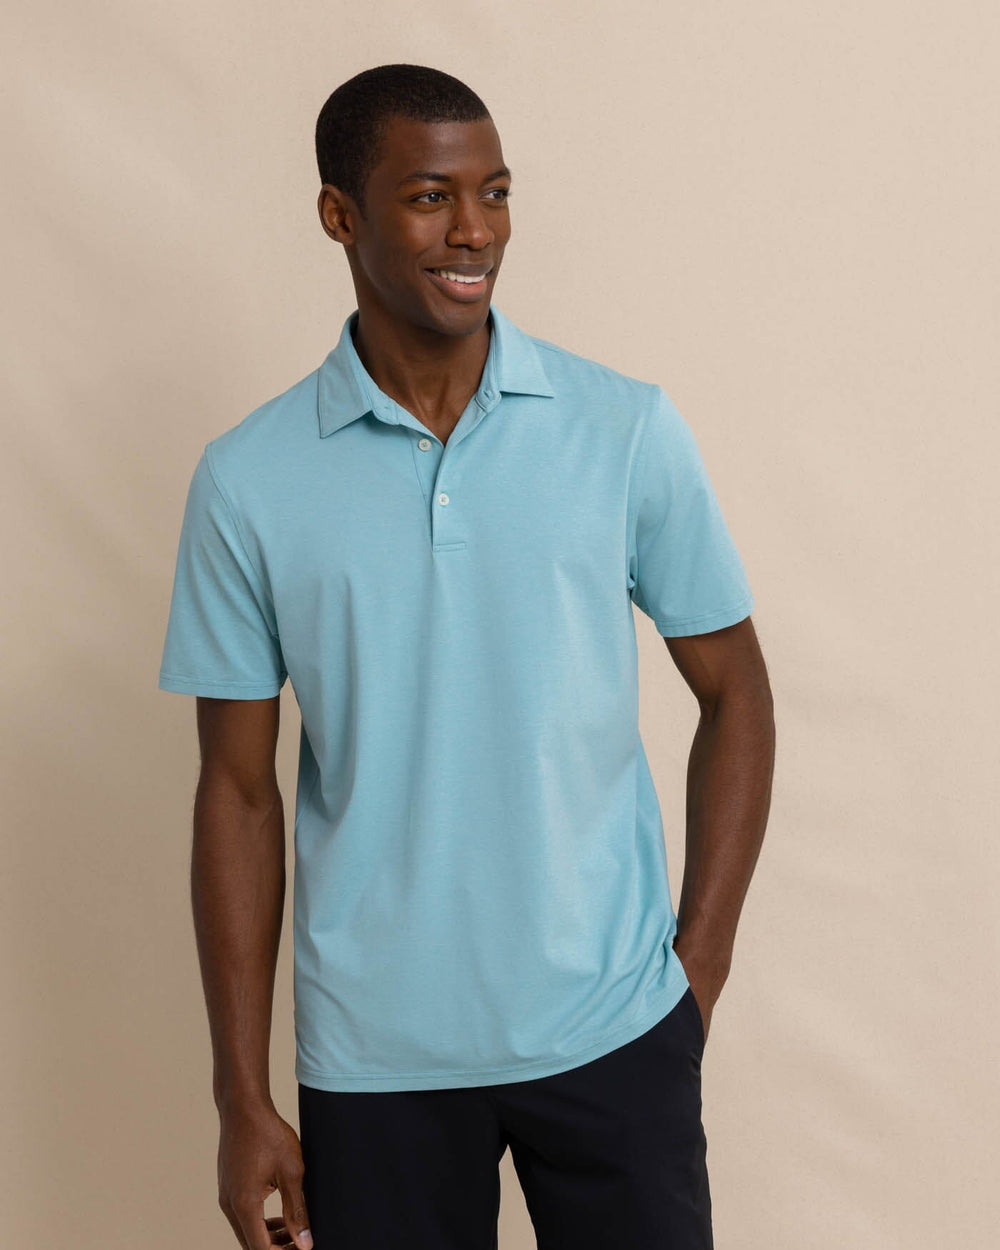 The front view of the Southern Tide brrr eeze Heather Performance Polo Shirt by Southern Tide - Heather Marine Blue